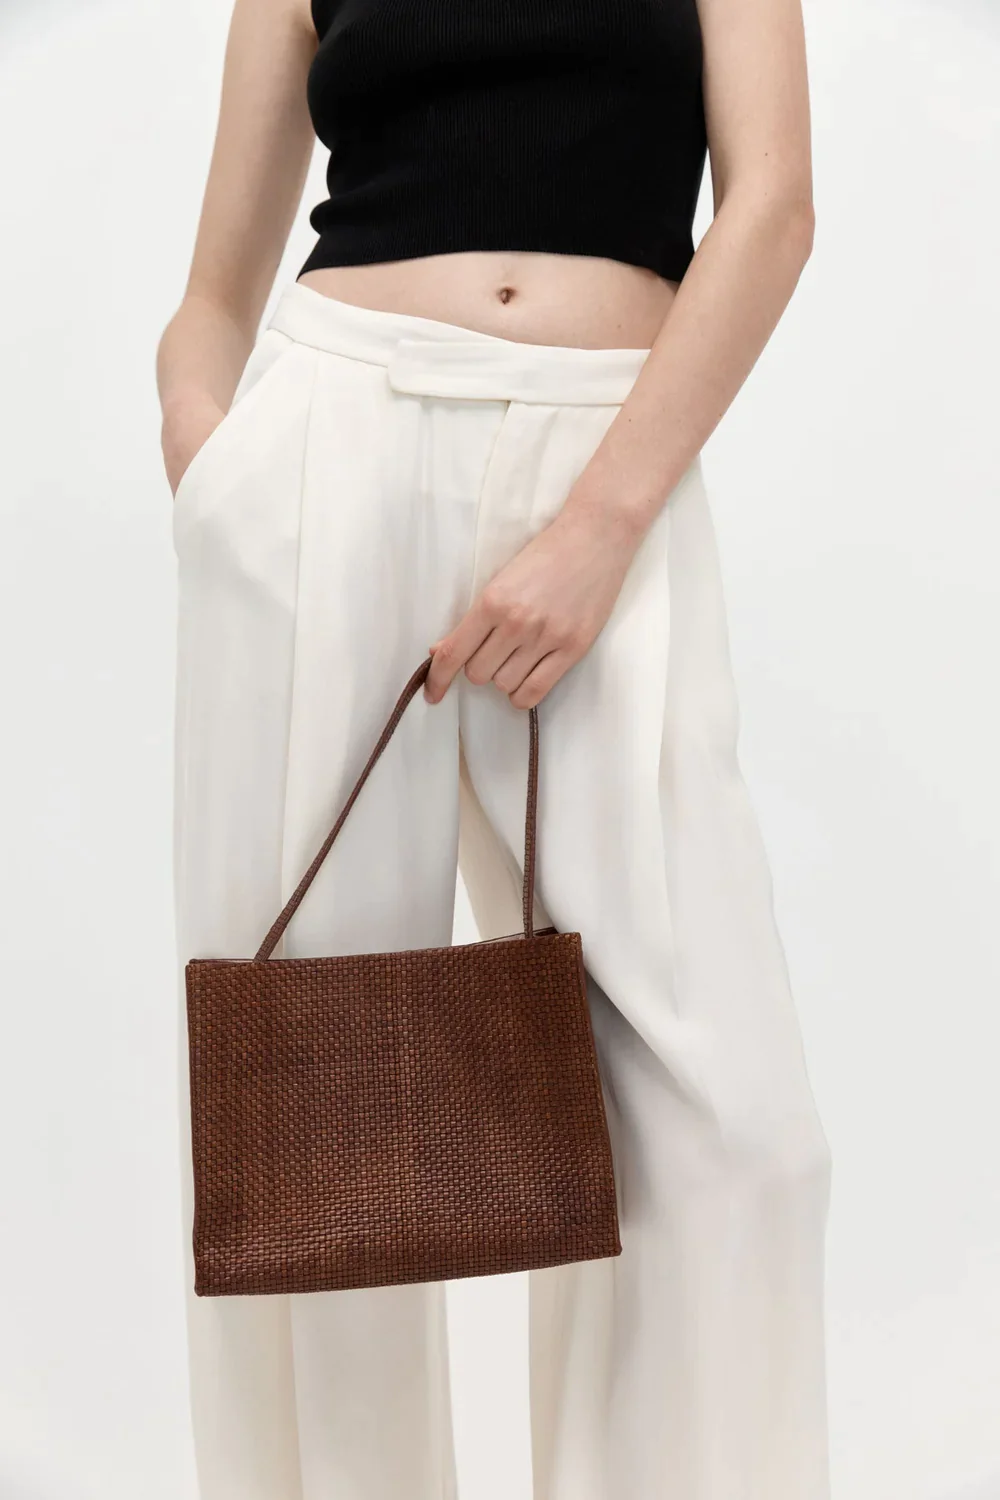 Product Image for Woven Minimal Mini Tote, Antique Tan